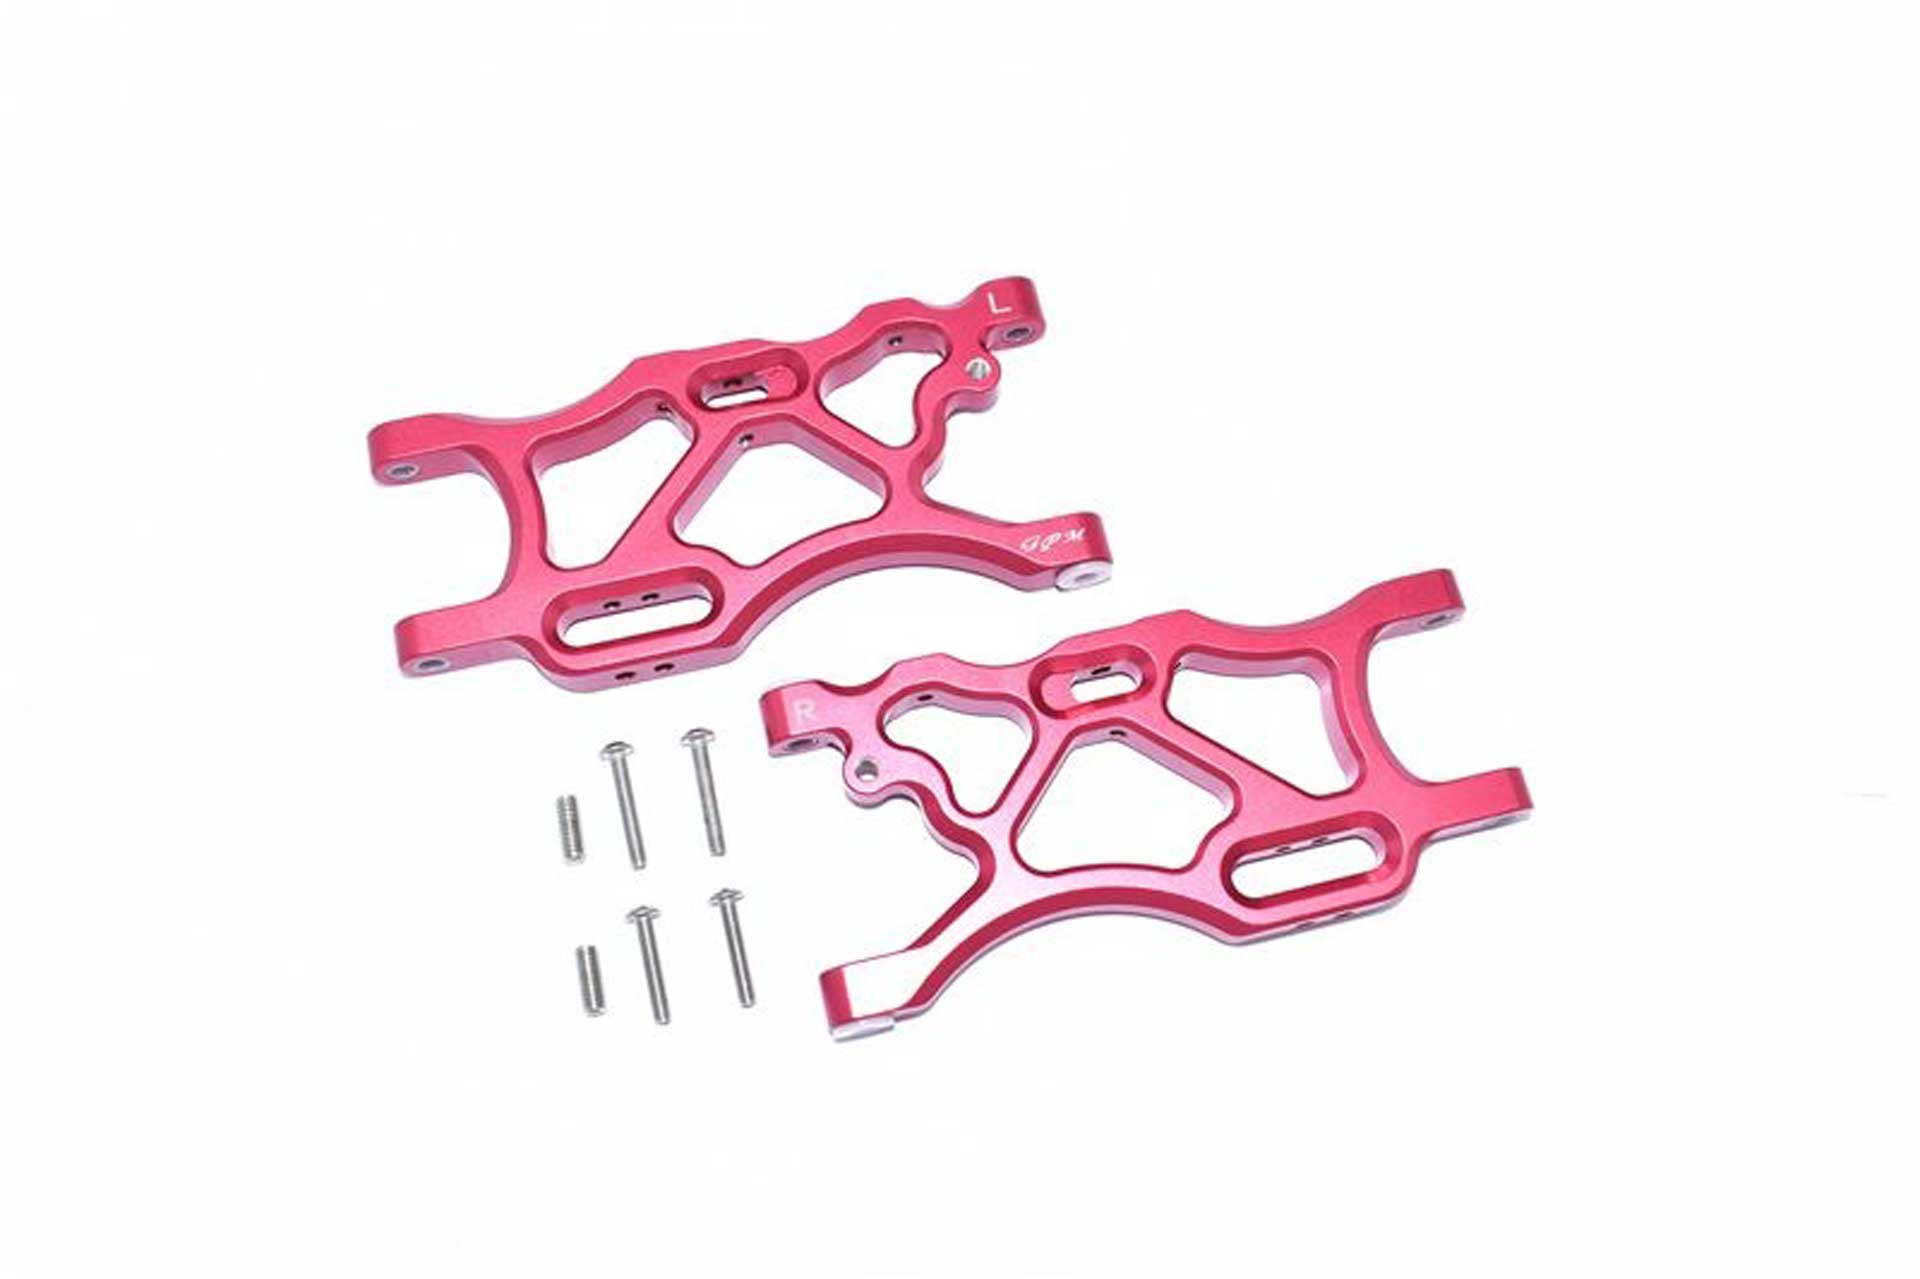 GPM ALUMINUM REAR LOWER ARMS -8PC SET red GPM ARRMA LIMITLESS INFRACTION TYPHON